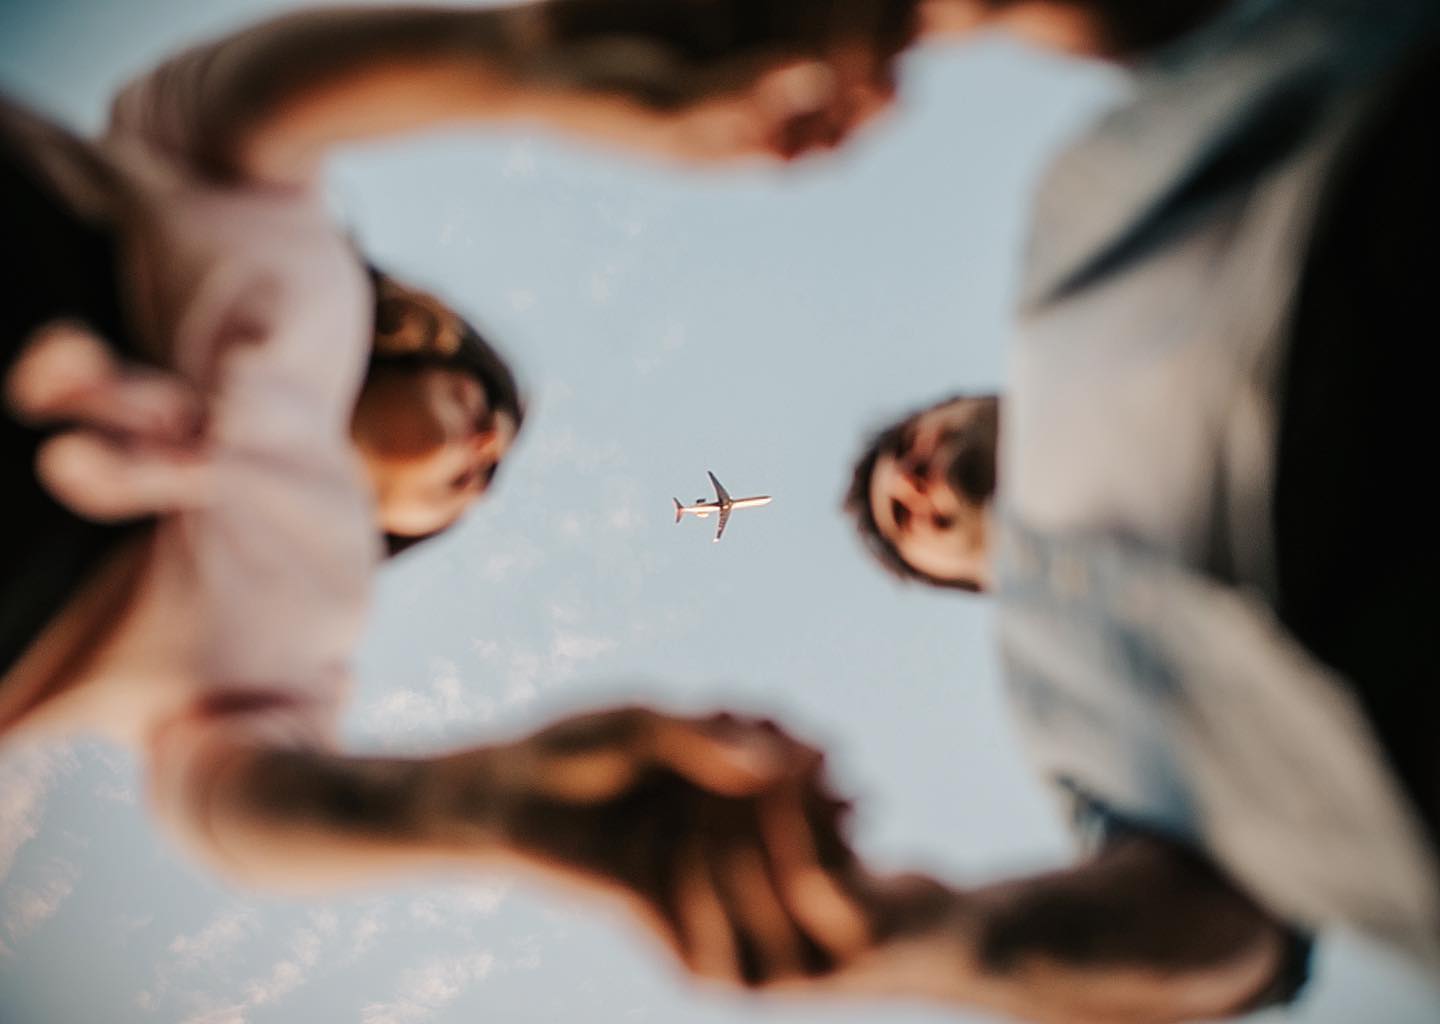 A worm's eye view of a couple holding hands and an airplane flying 